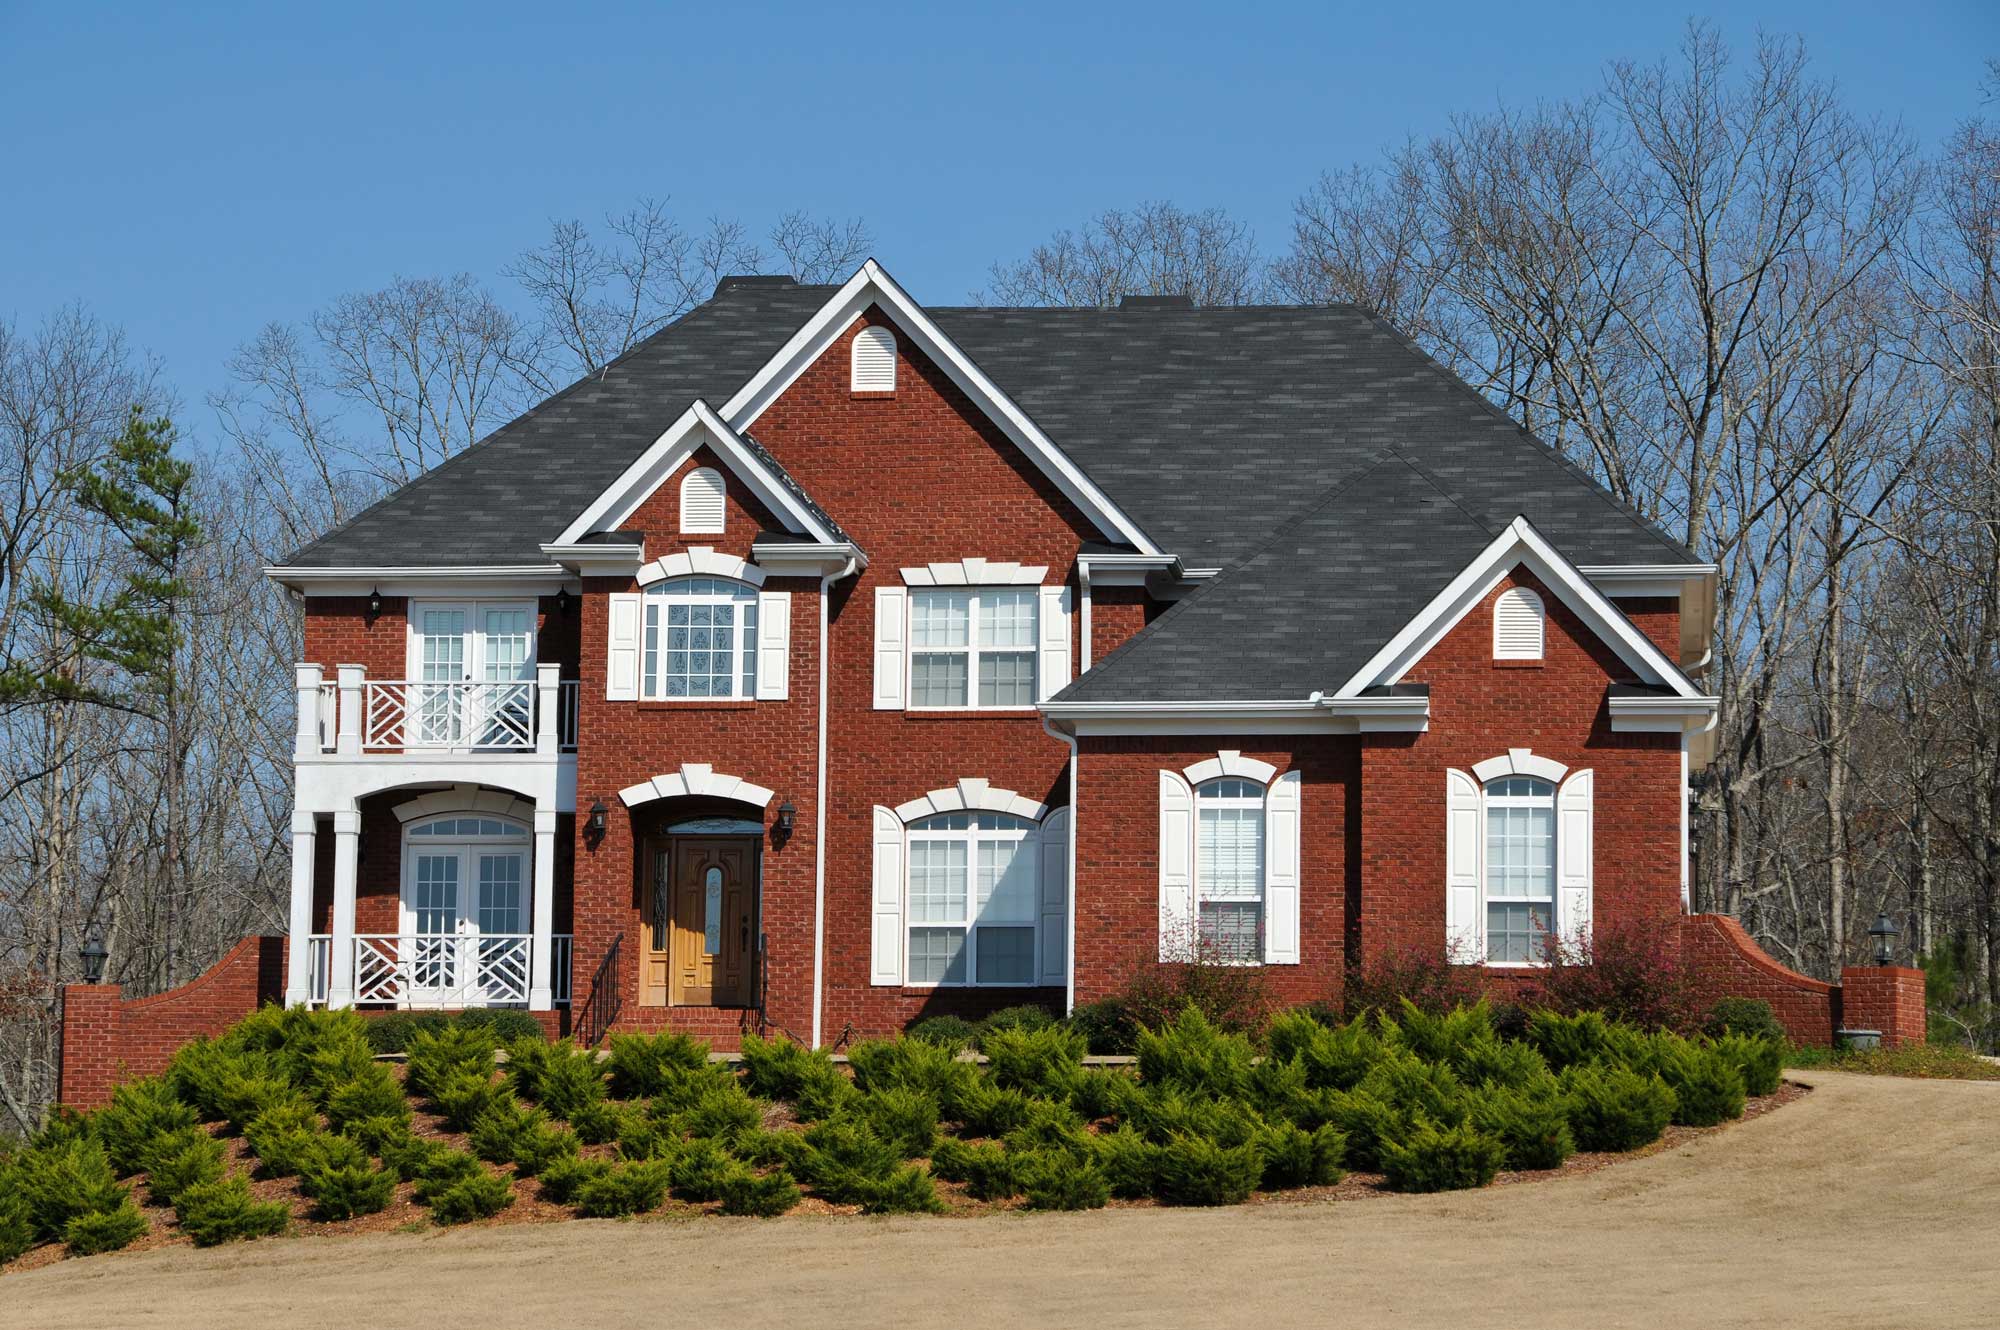 best roof type, popular roof types, best roofing material